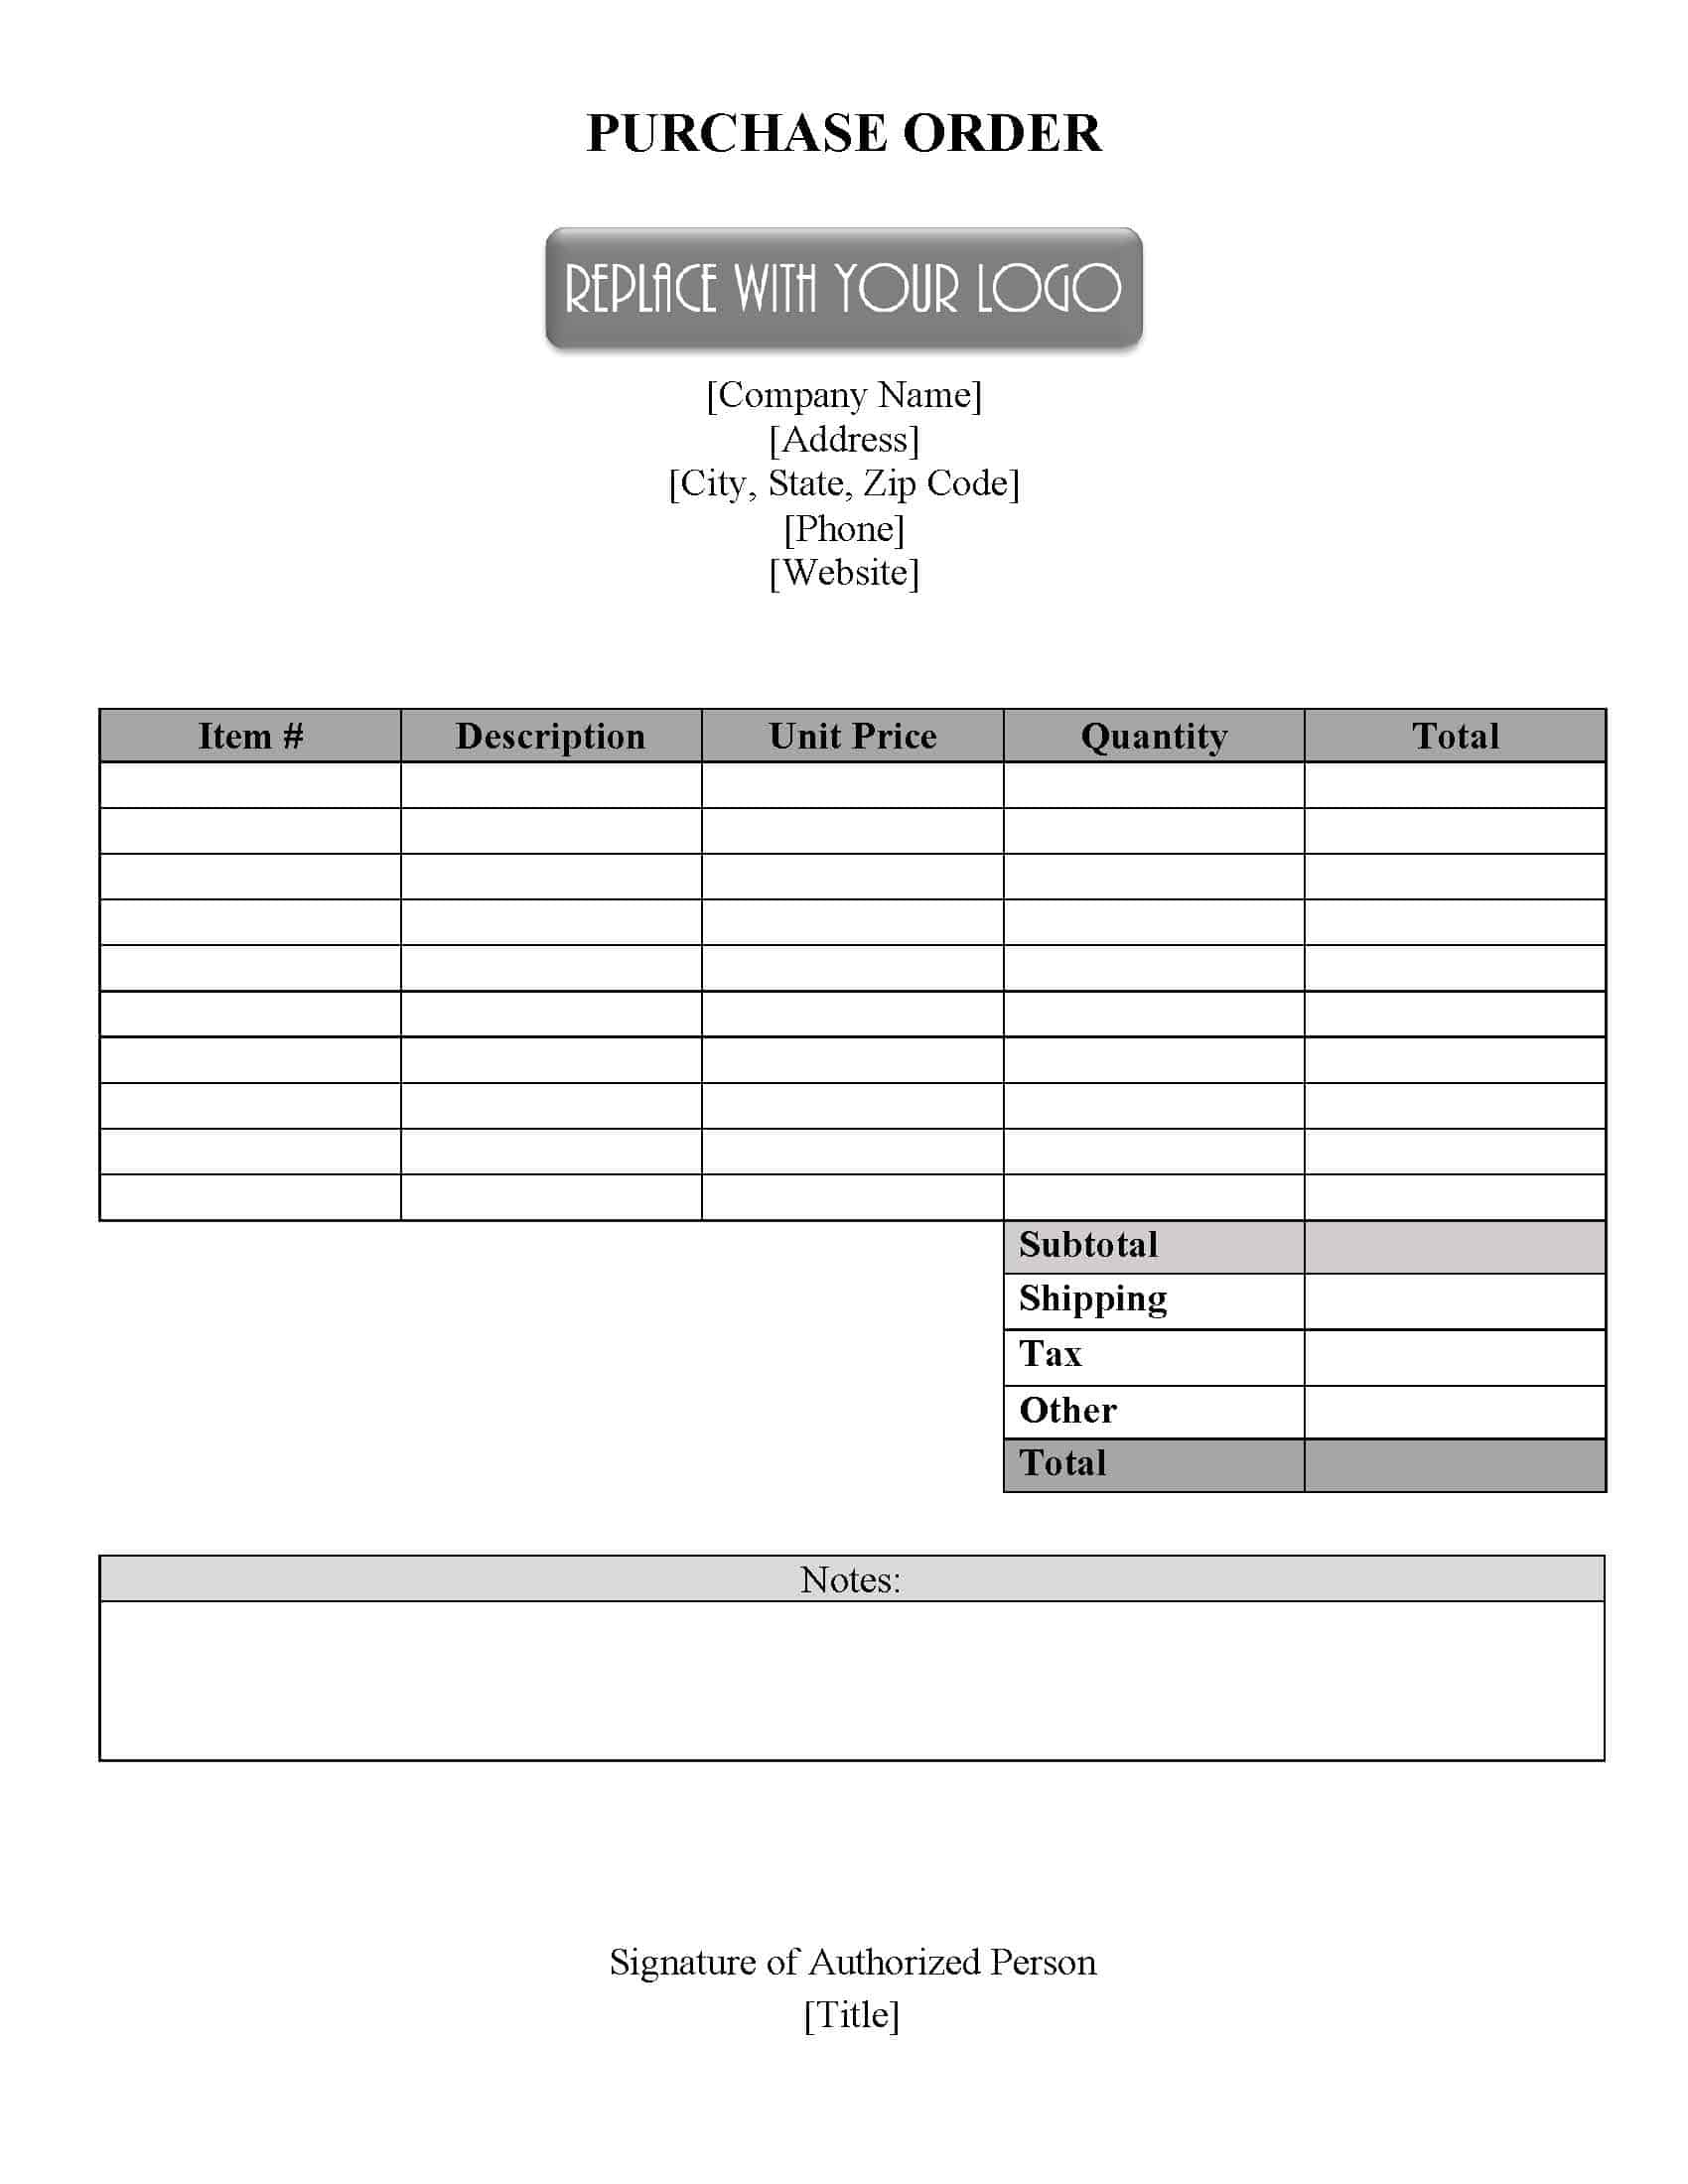 printable-purchase-order-form-template-printable-templates-free